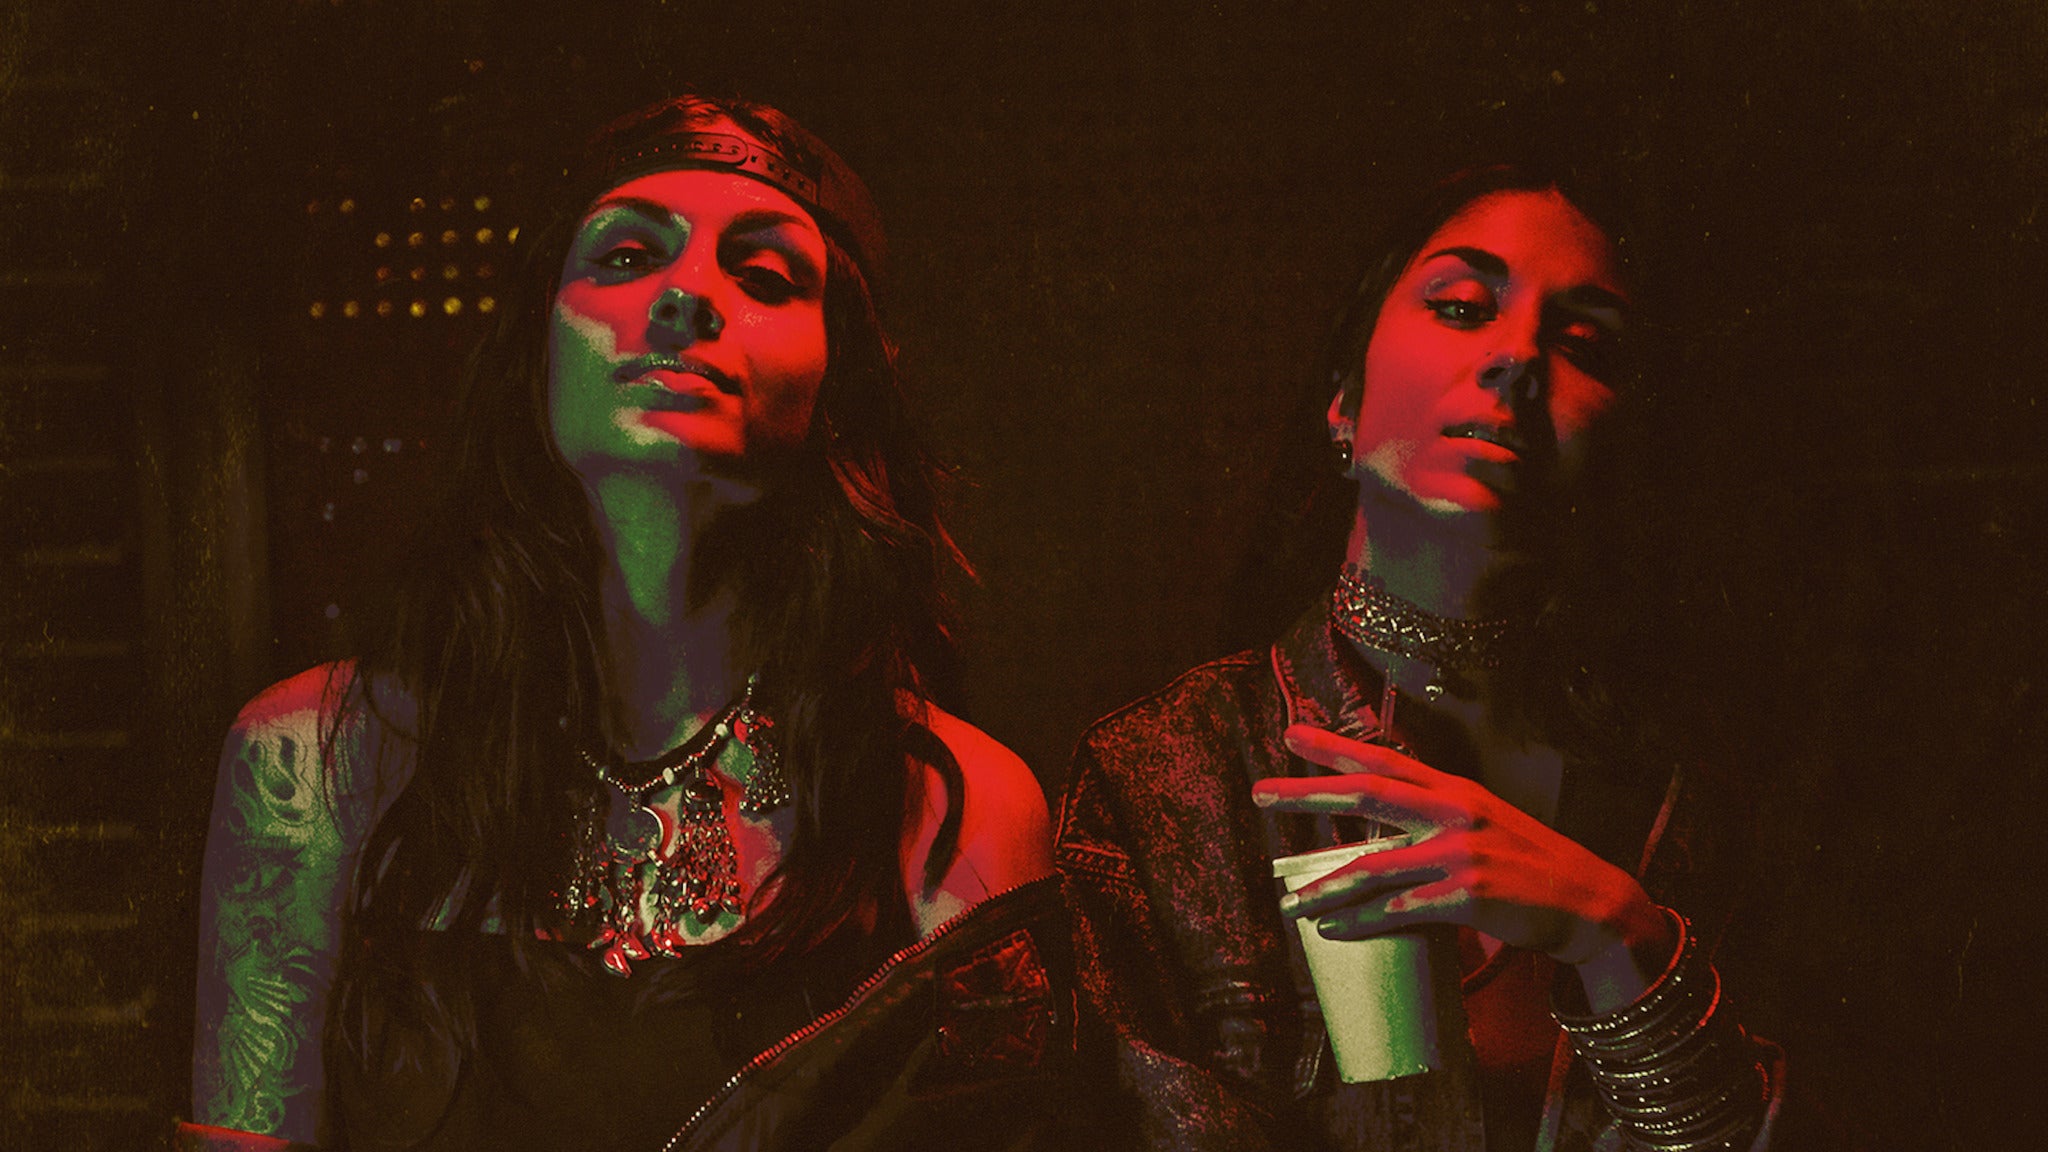 Krewella - New World Tour presented by SiriusXM BPM in Chicago promo photo for Spotify presale offer code